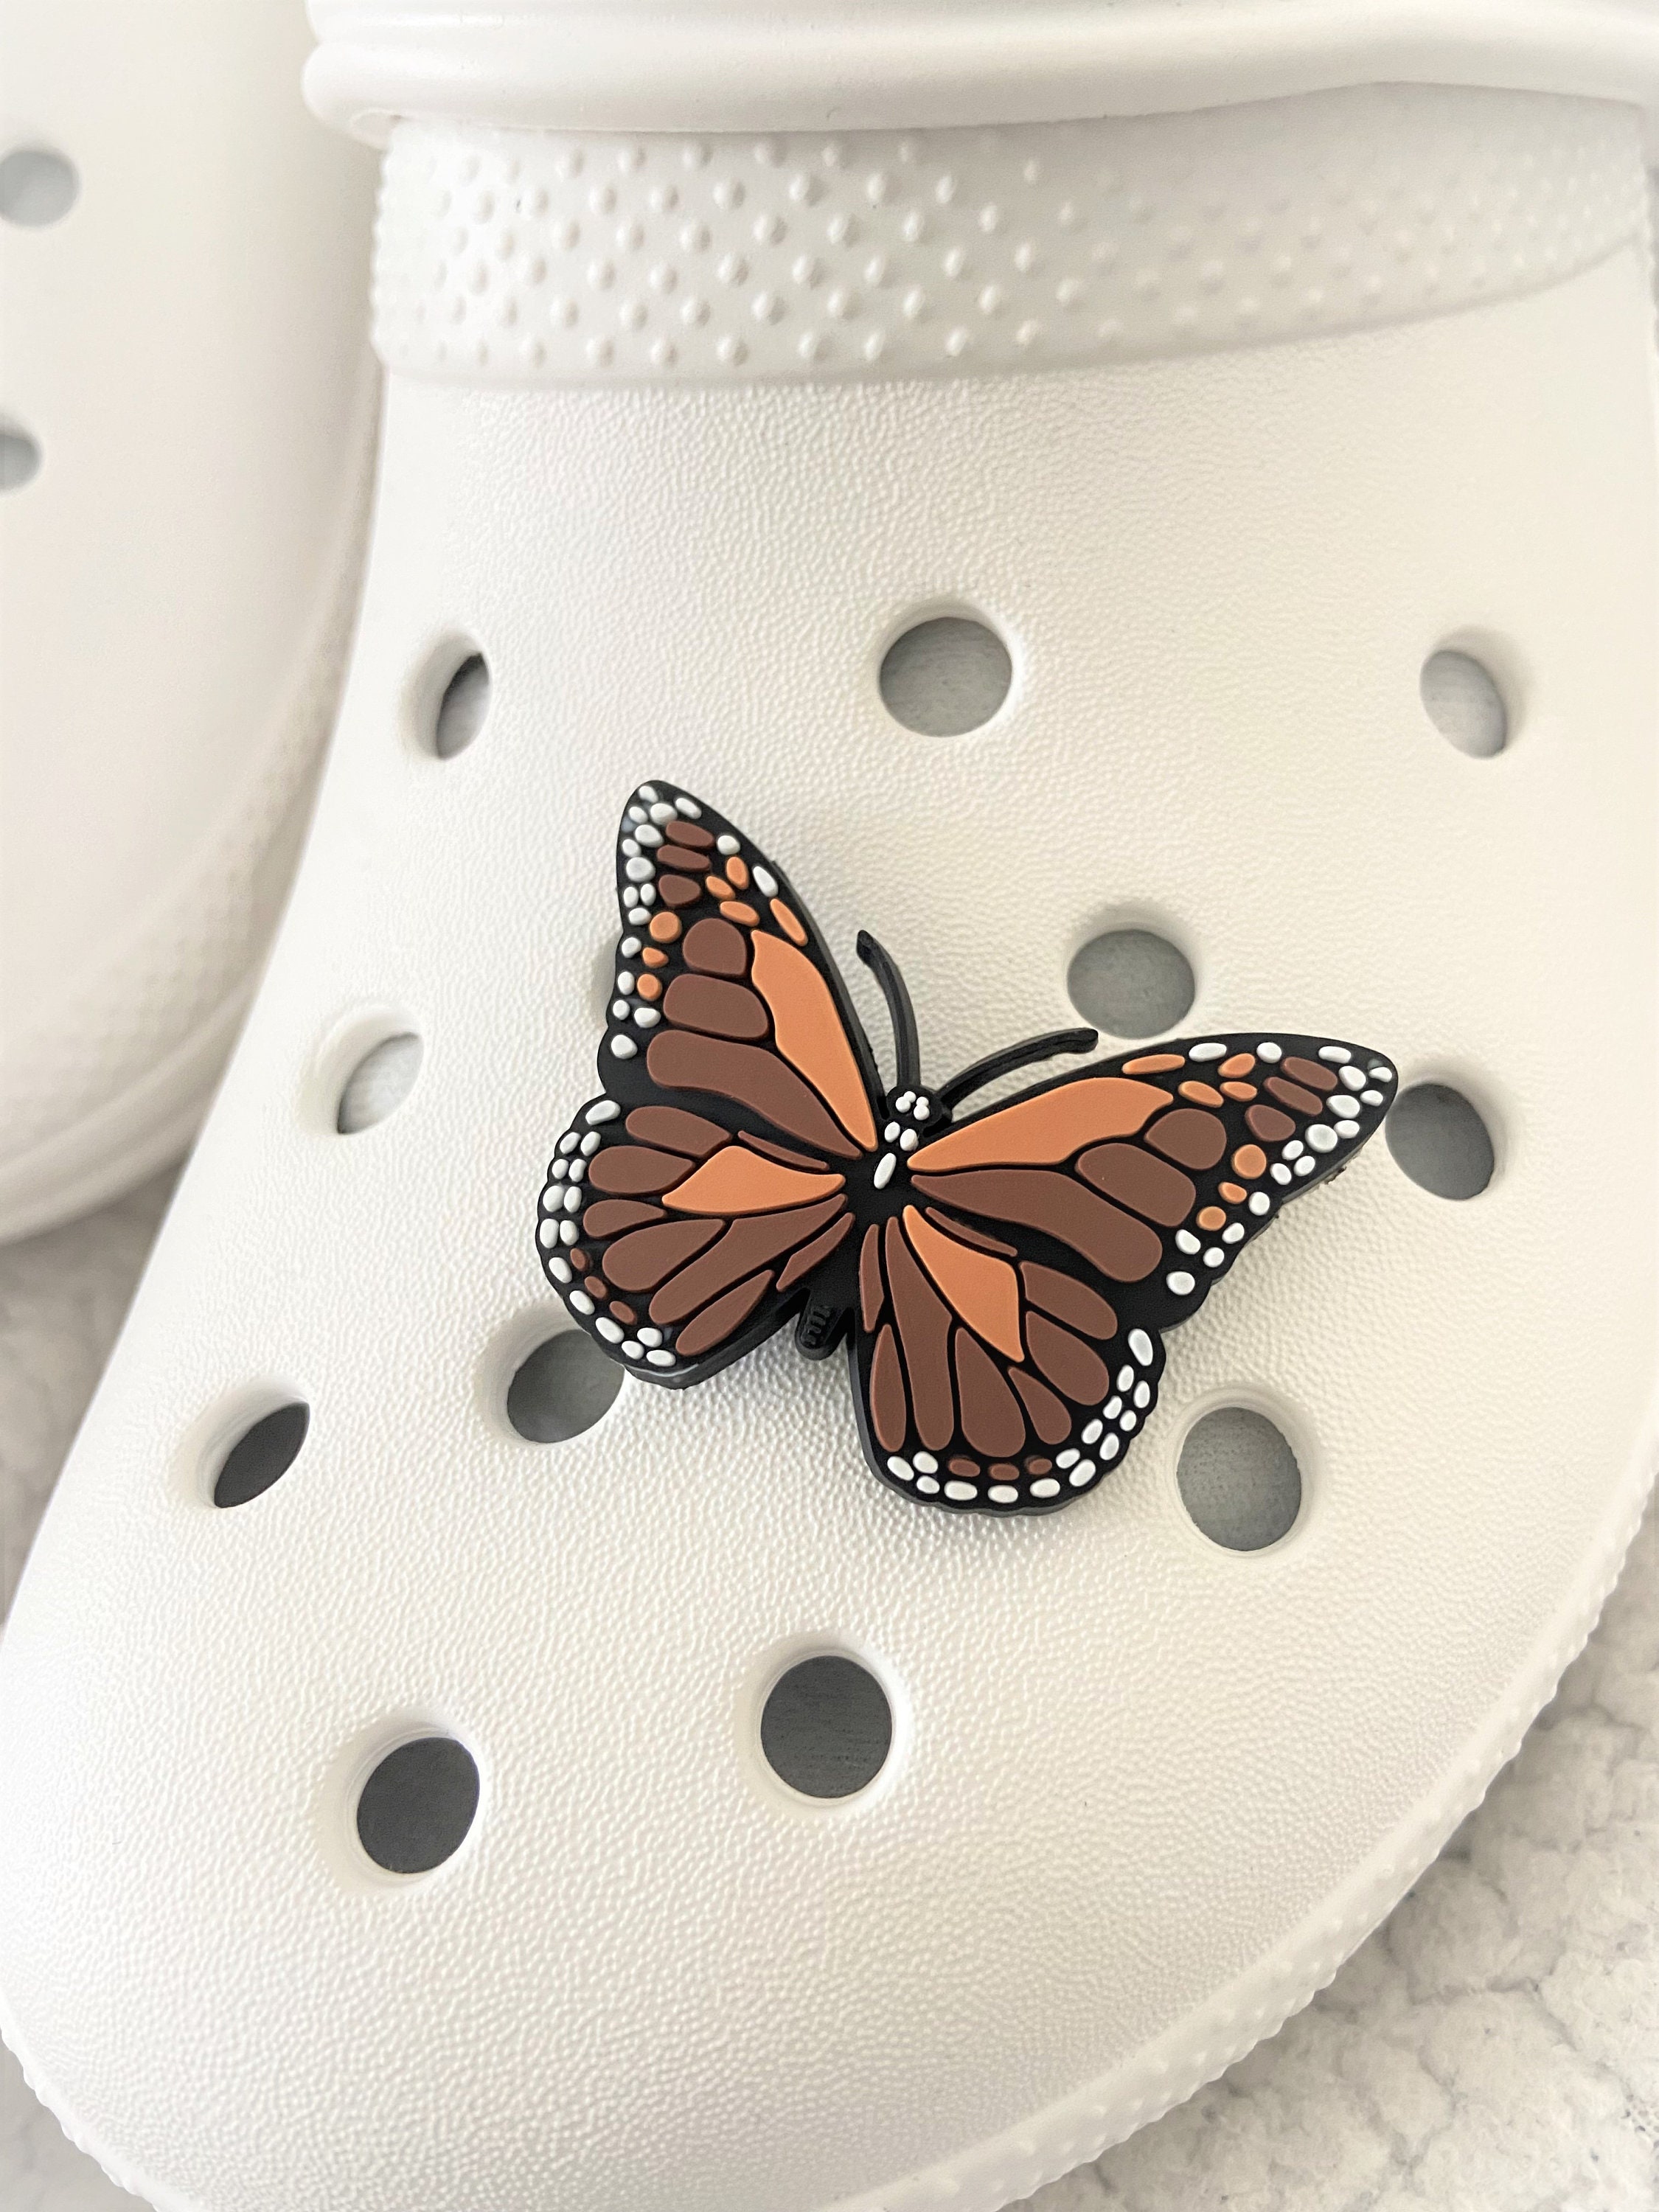 Butterfly Series Shoes Charms For Clogs Sandals Decoration, Shoes